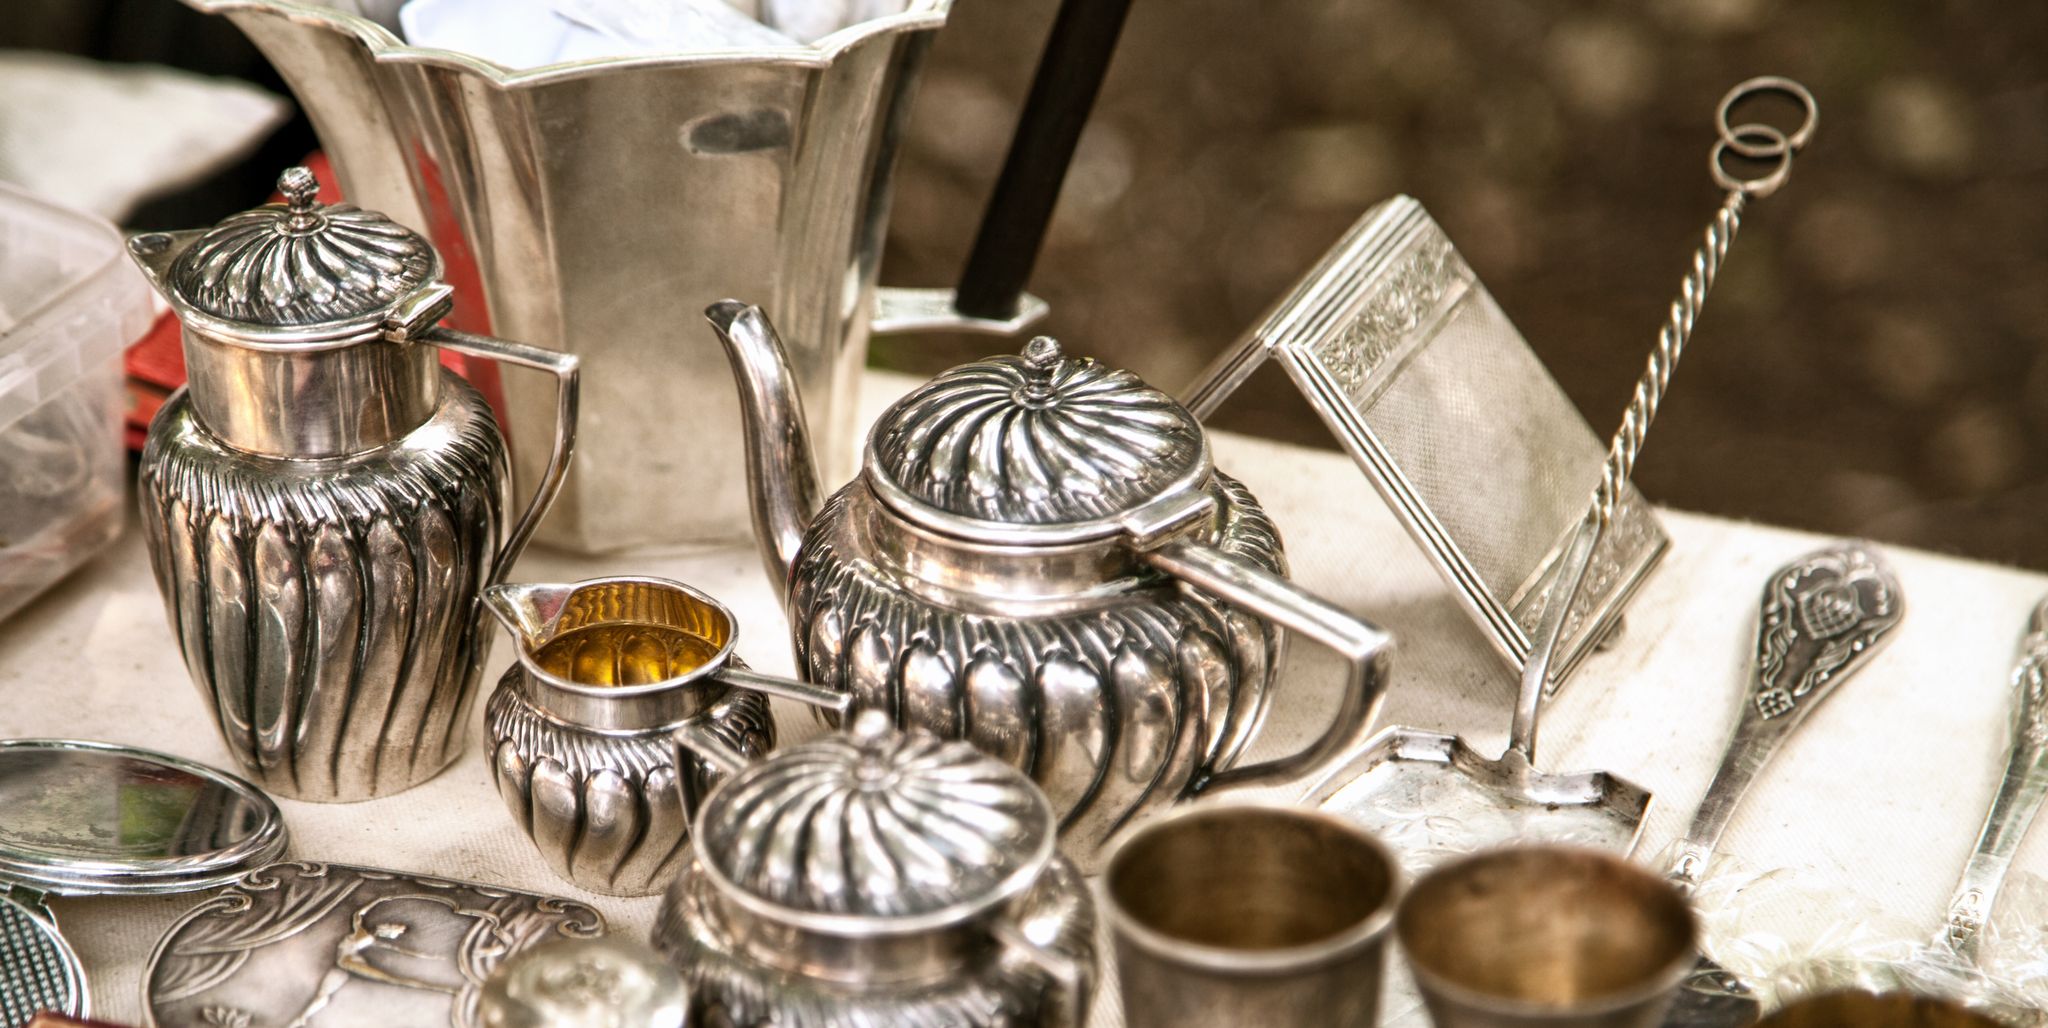 https://hips.hearstapps.com/hmg-prod/images/antique-silver-teapots-creamer-and-other-utensils-royalty-free-image-1704405445.jpg?crop=1.00xw:0.753xh;0,0.179xh&resize=2048:*